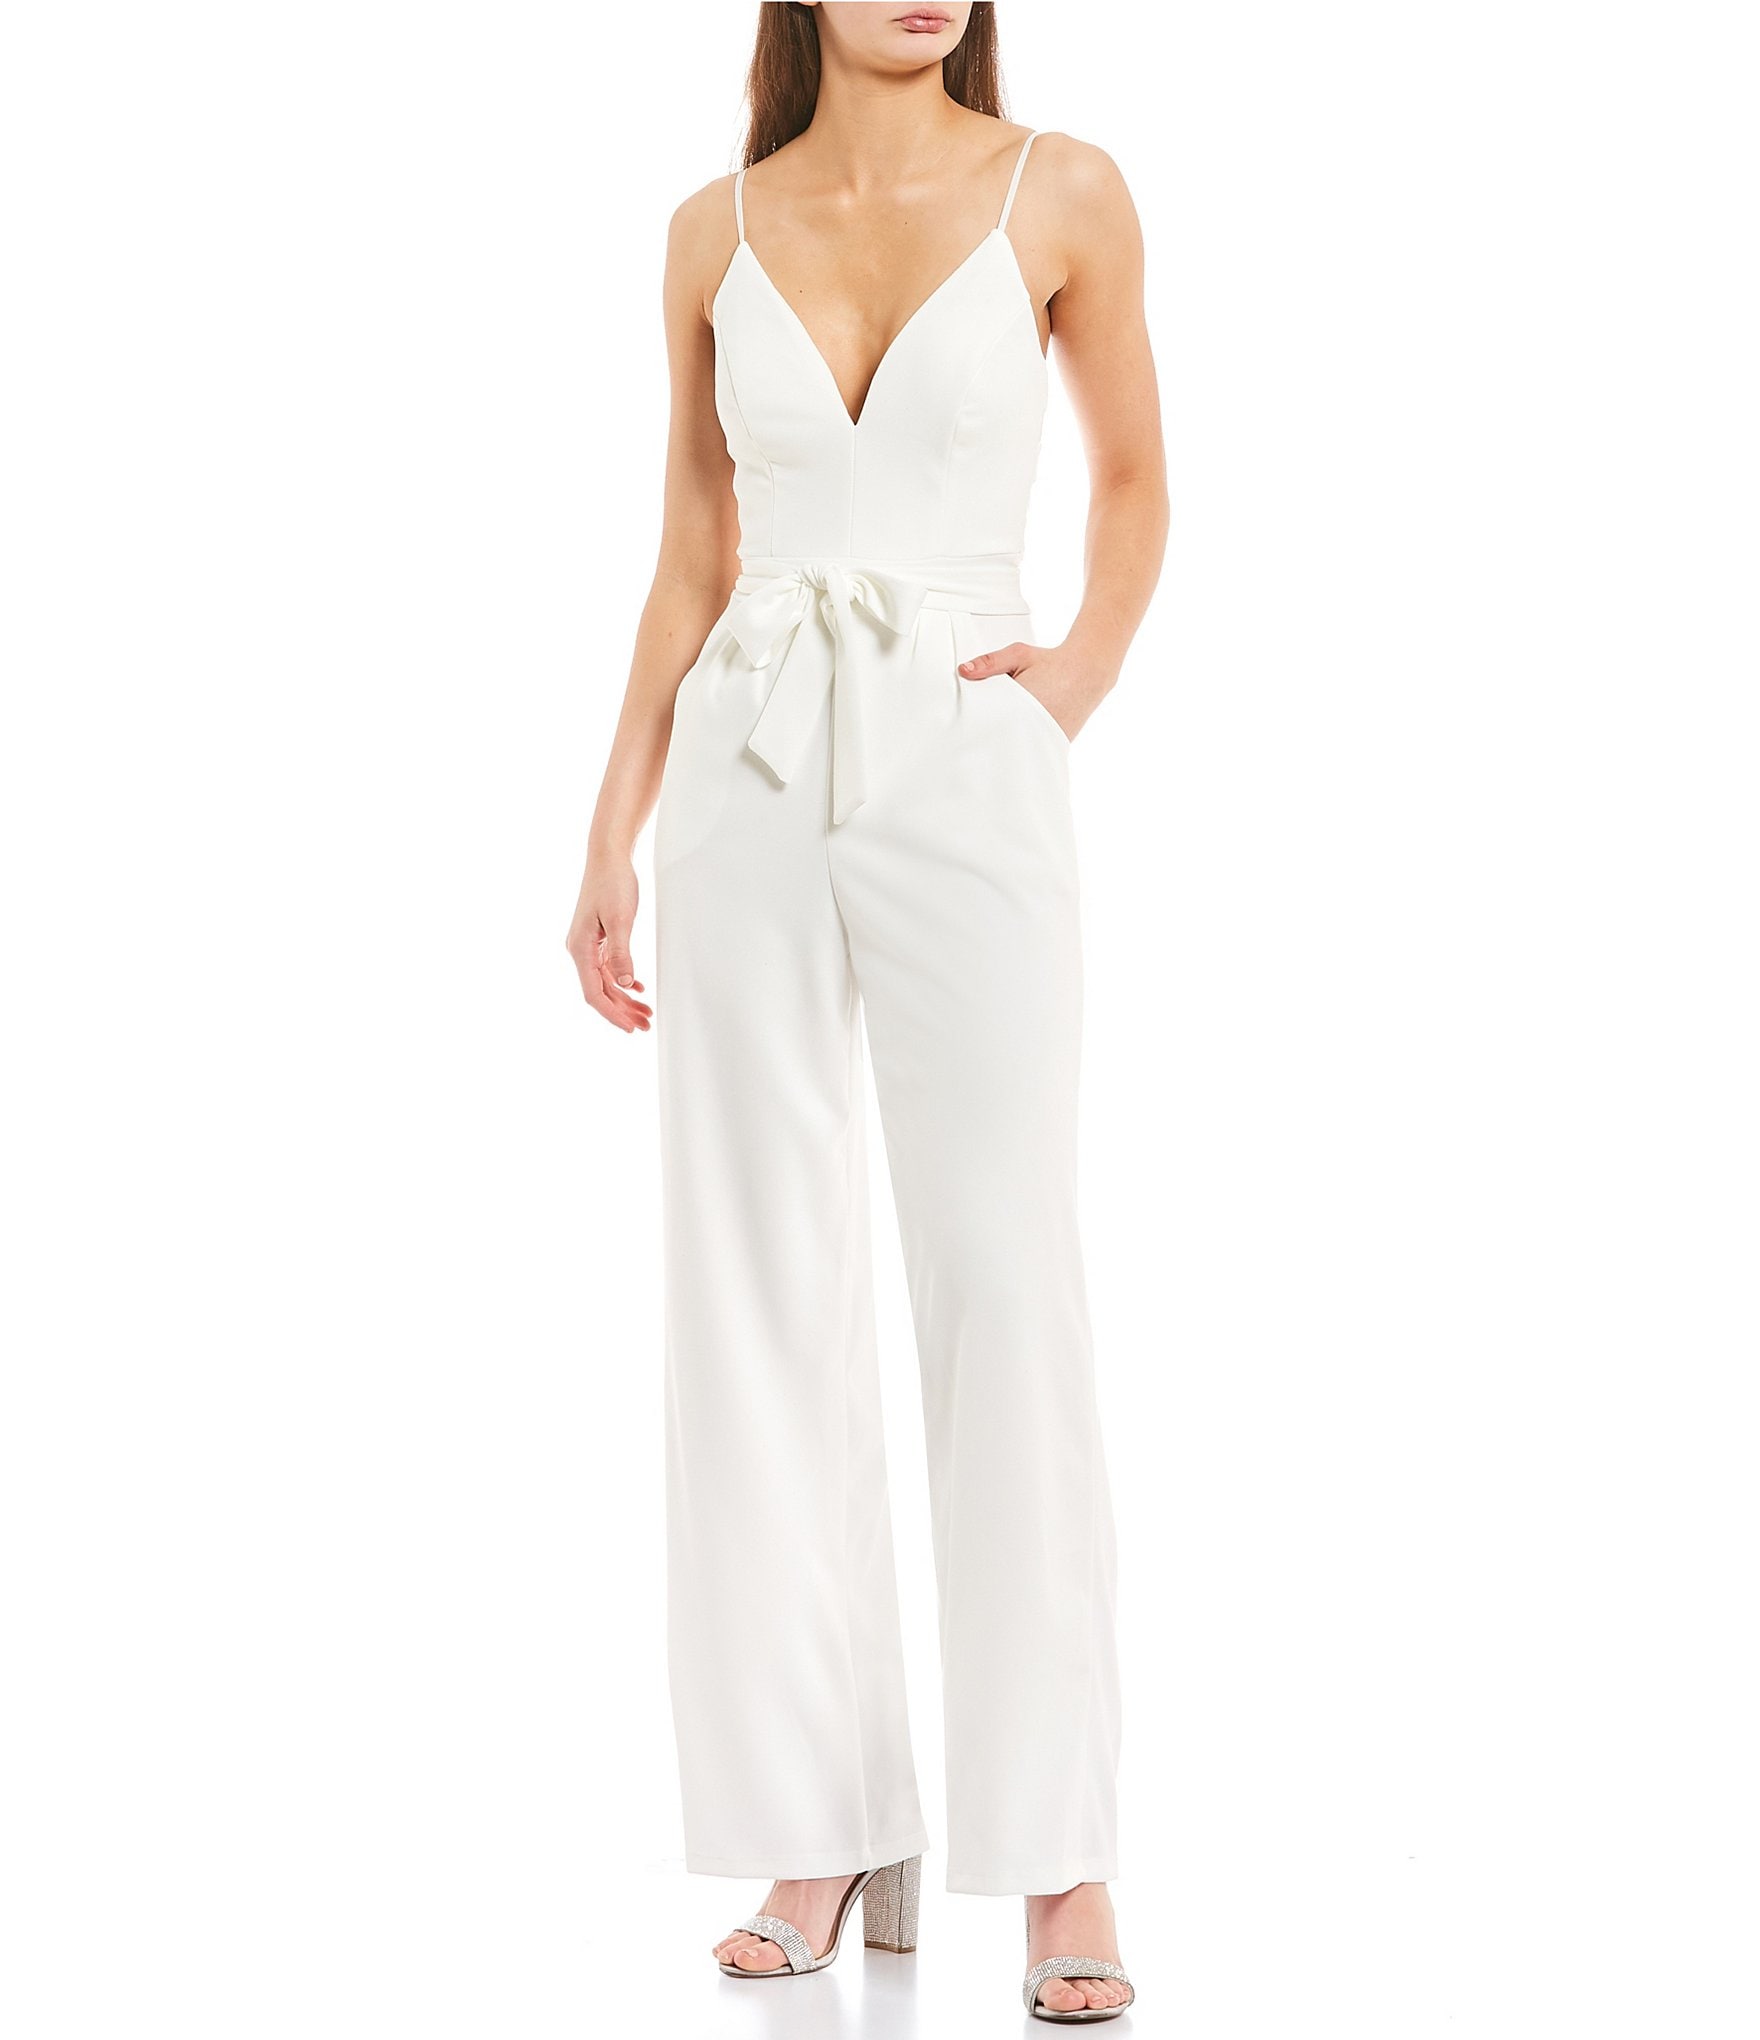 In Love With This Jumpsuit😍 🔎Arianna Jumpsuit #honeypinkapparel #hon